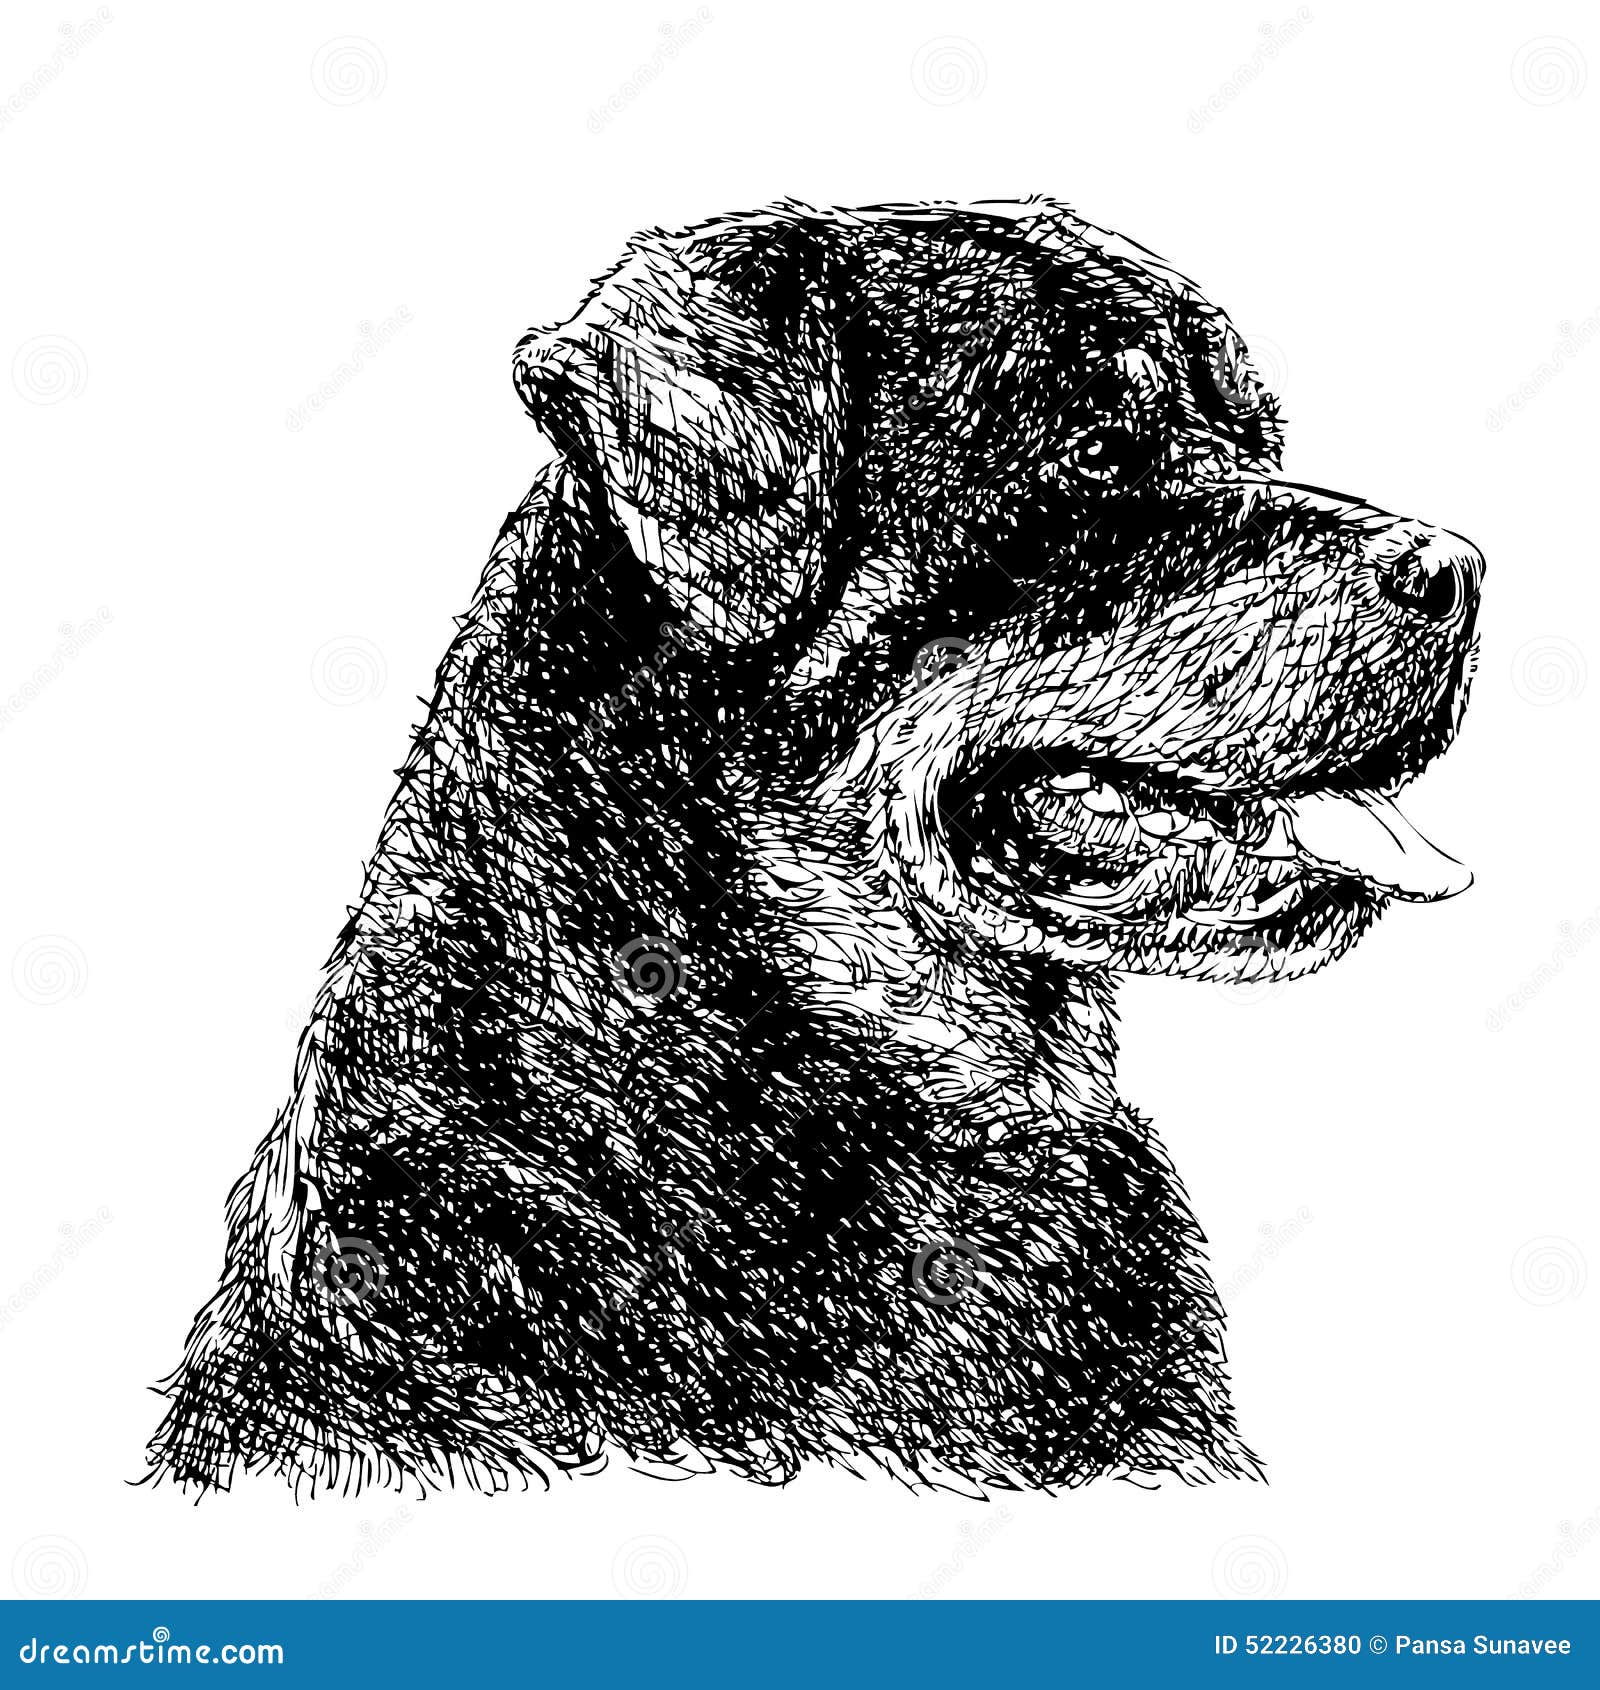 Rottweiler stock vector. Illustration of isolated, adorable - 52226380